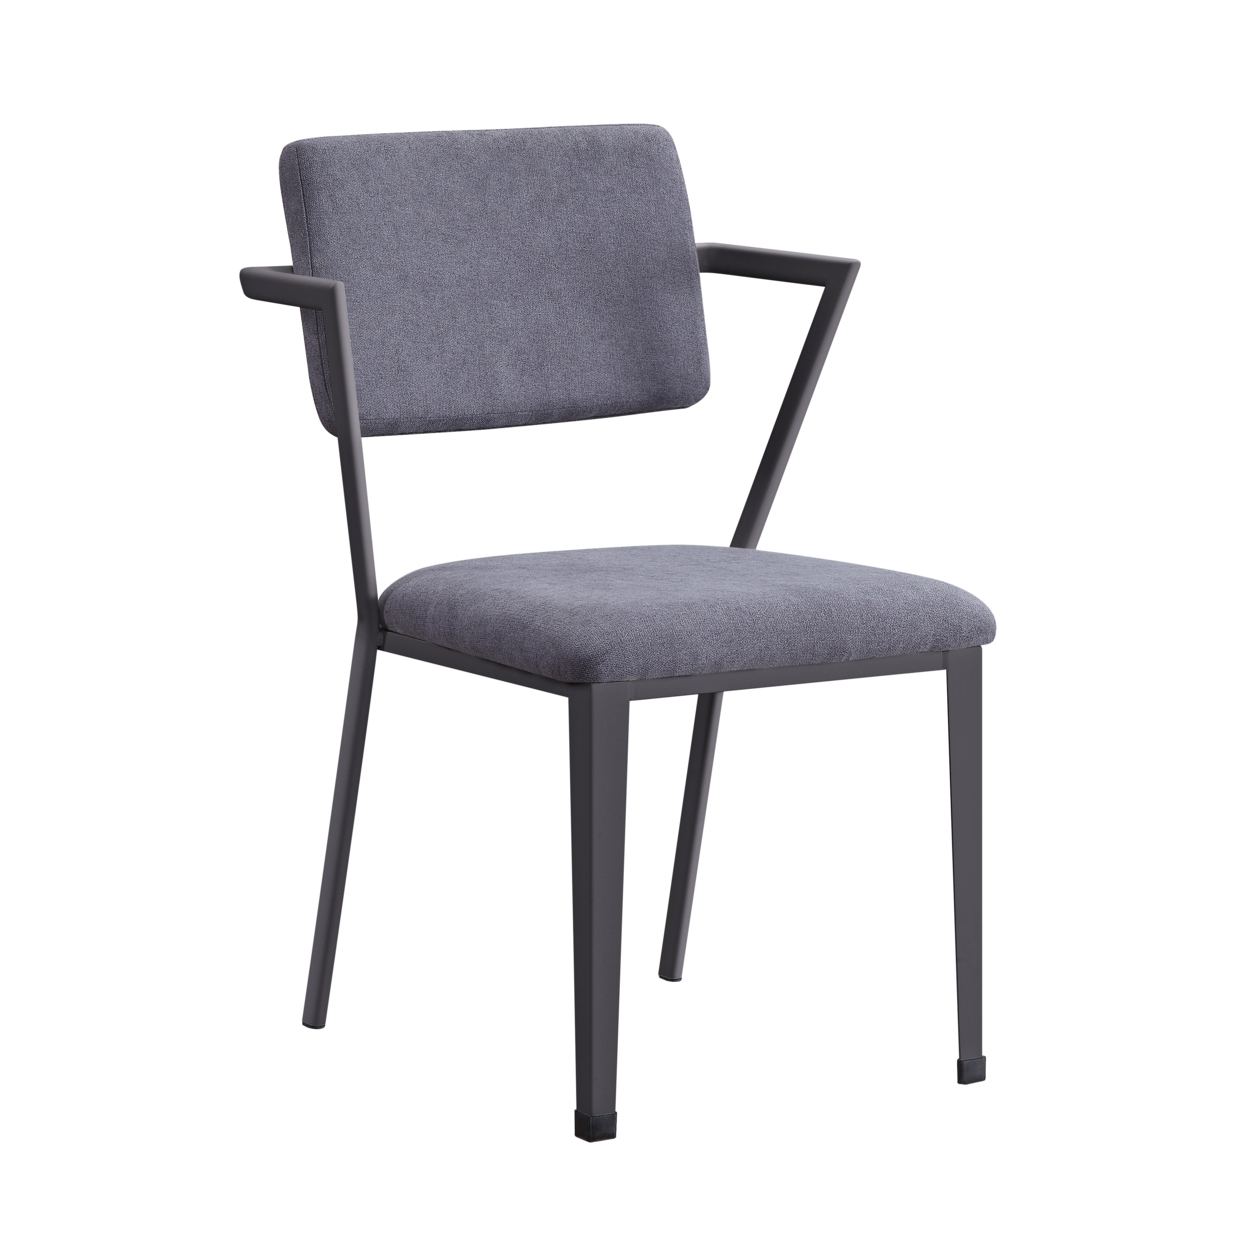 Metal Chair With Fabric Upholstered Seat And Back, Gray- Saltoro Sherpi